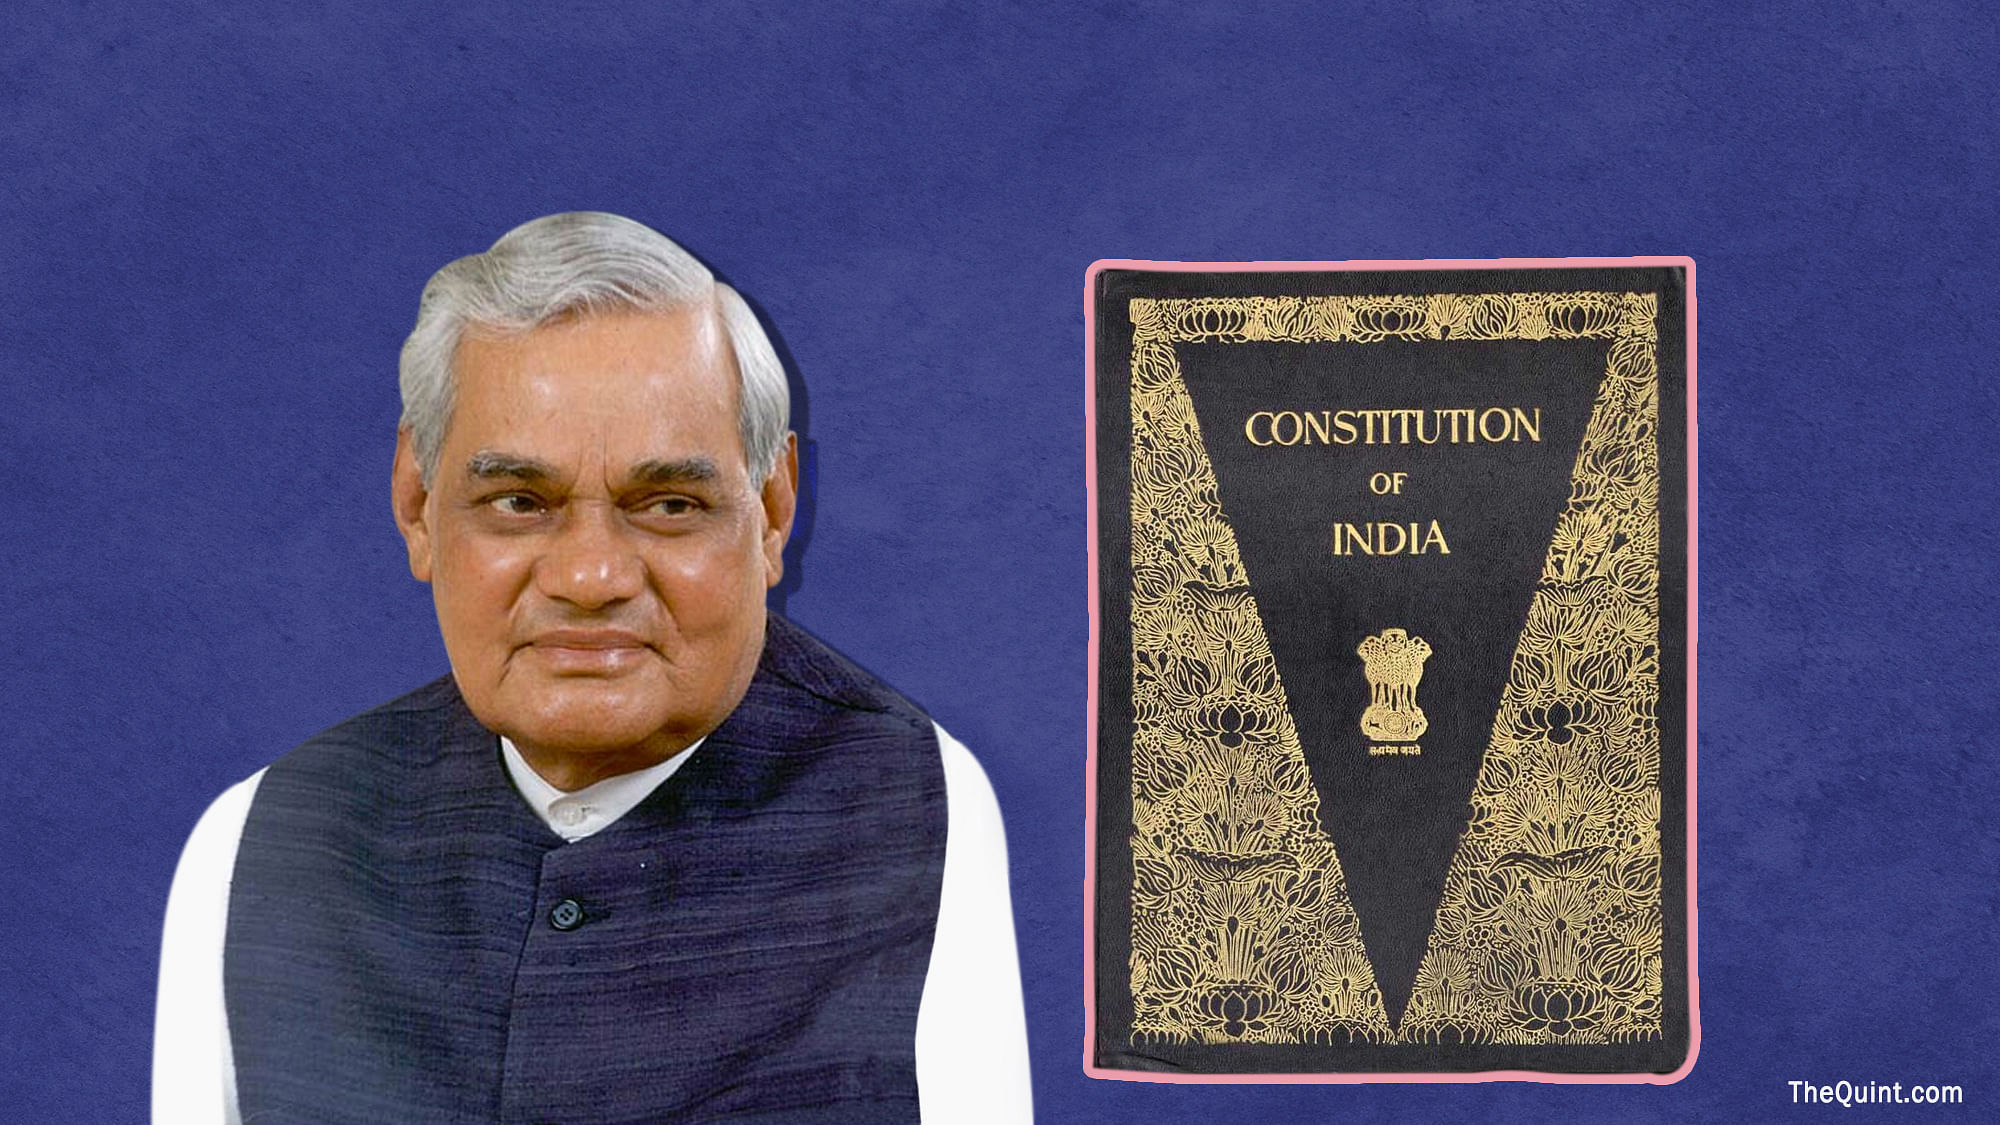 Constitutional amendments rushed through during the Congress’ years resulted in the centralisation of power.